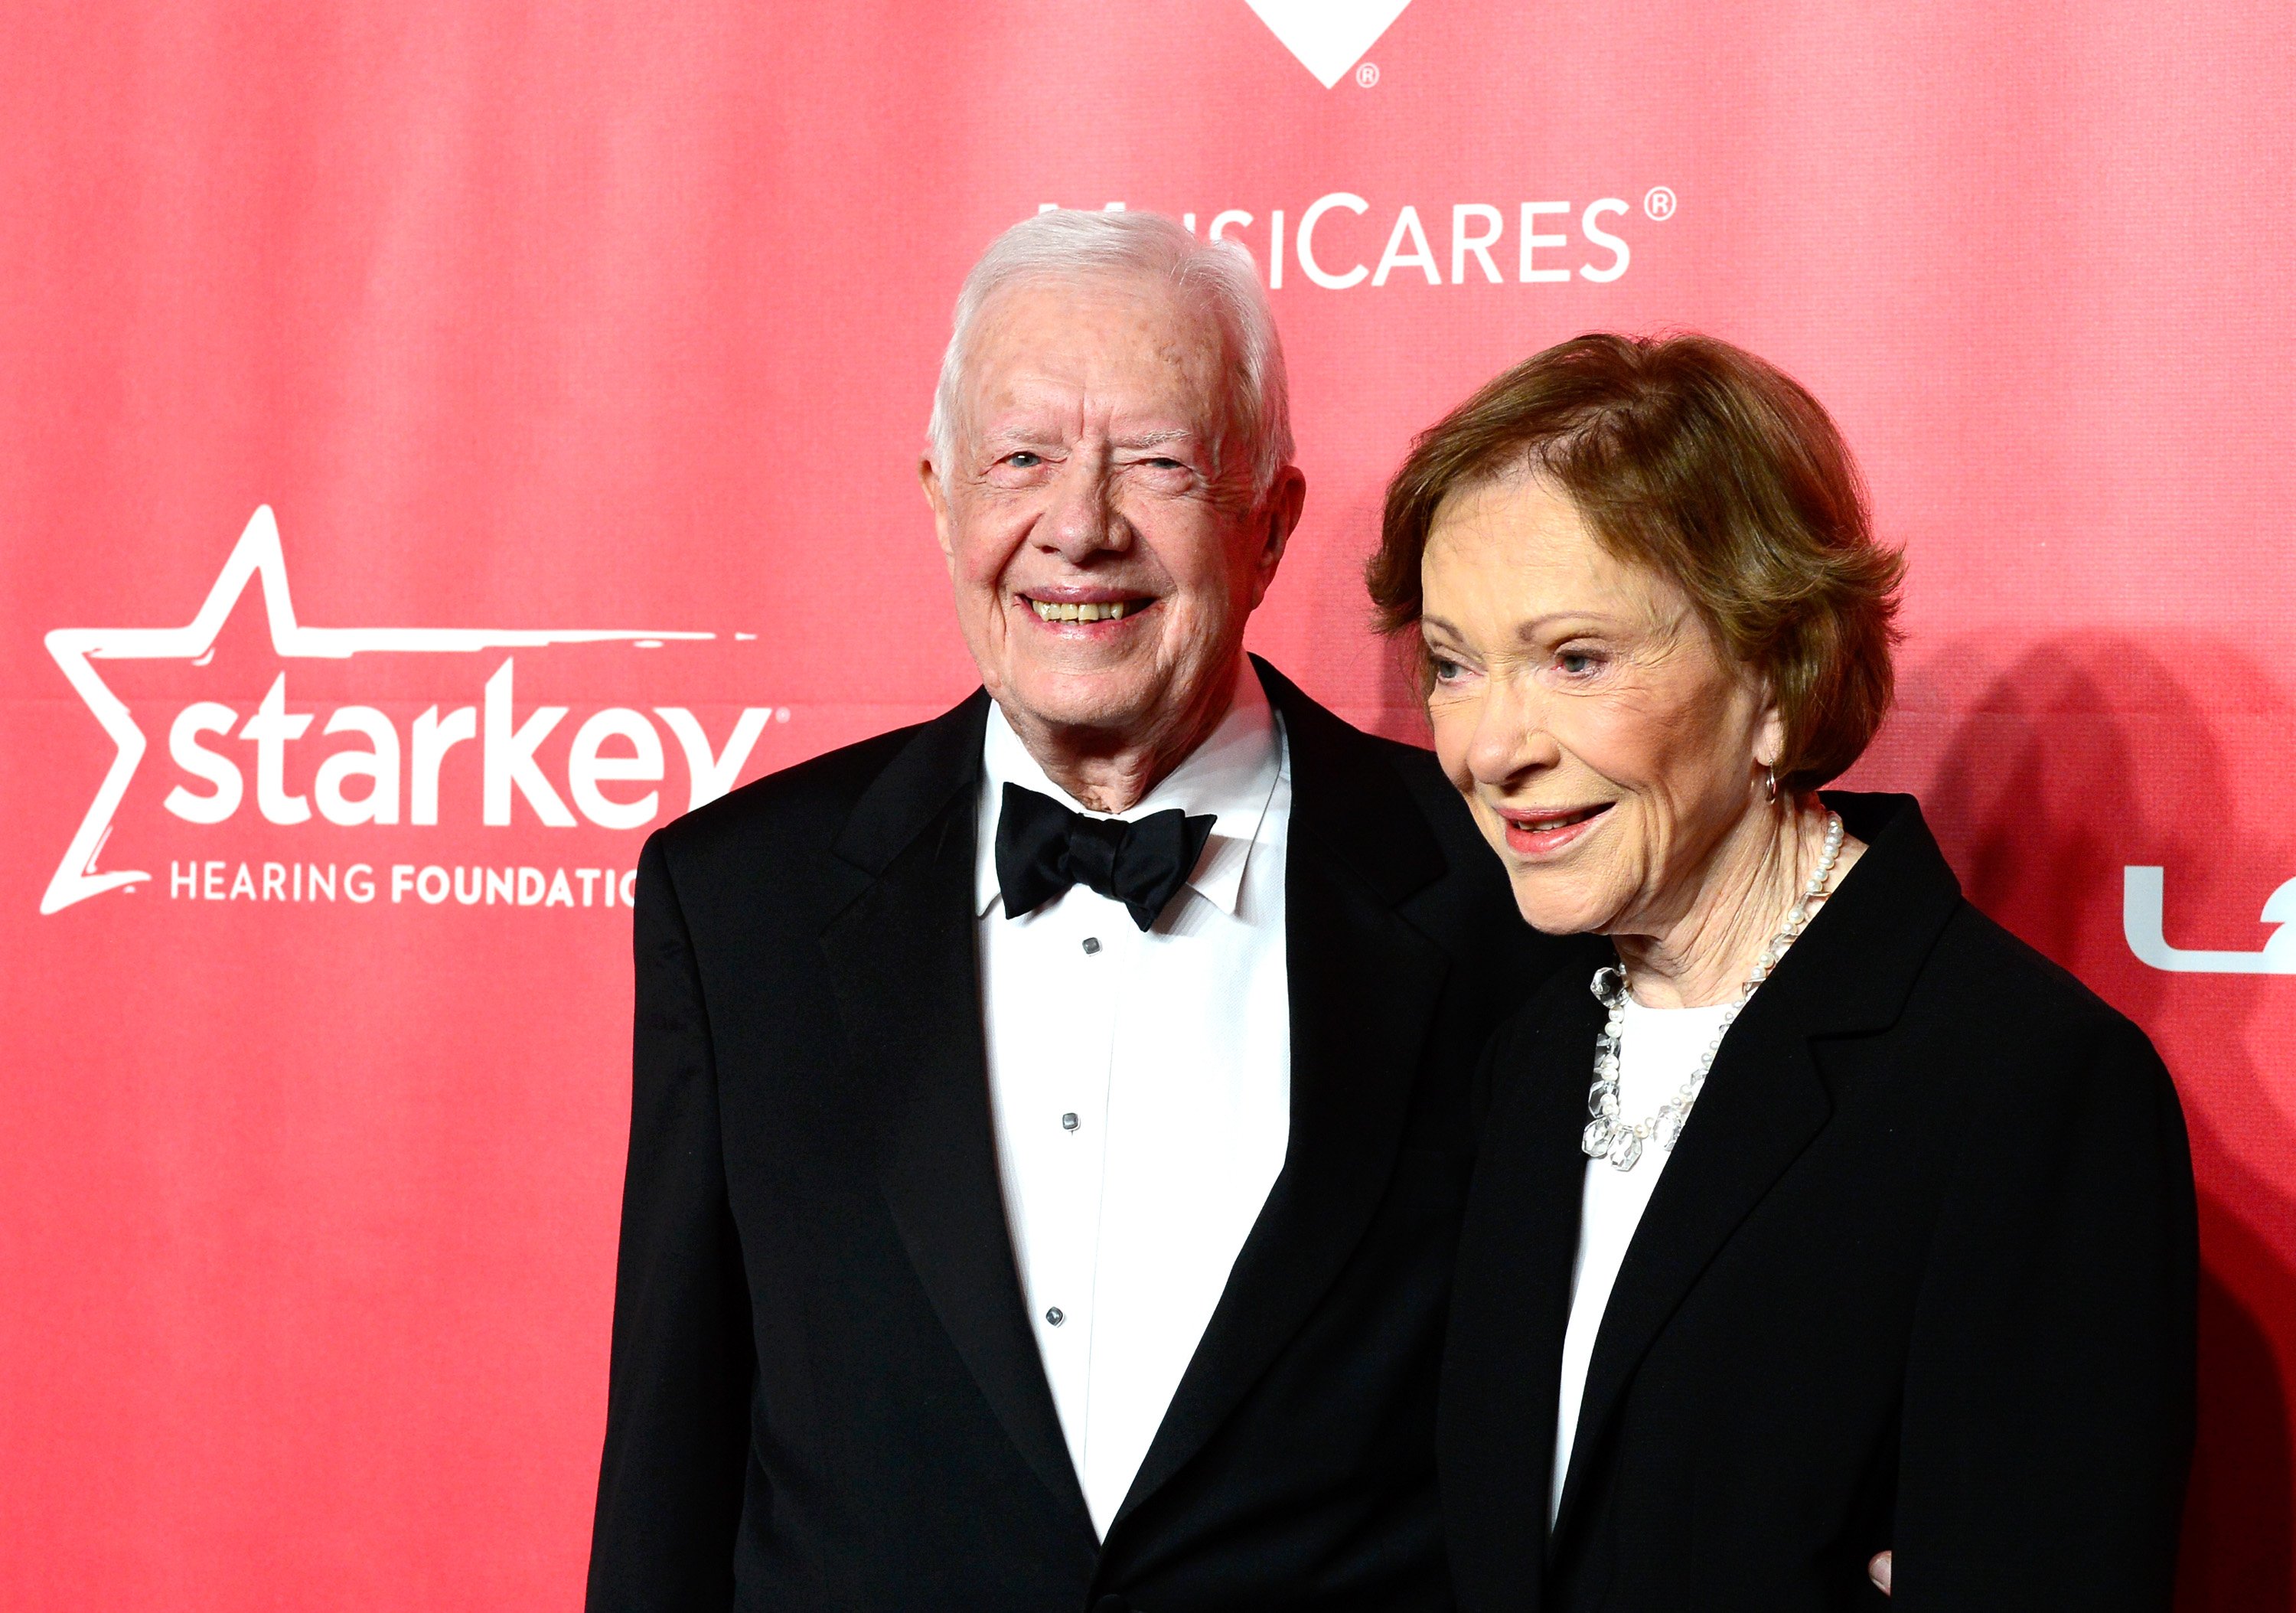 Former U.S. President Jimmy Carter and former First Lady Rosalynn Carter attend the 25th anniversary MusiCares 2015 Person Of The Year Gala on February 6, 2015, in Los Angeles, California. | Source: Getty Images.